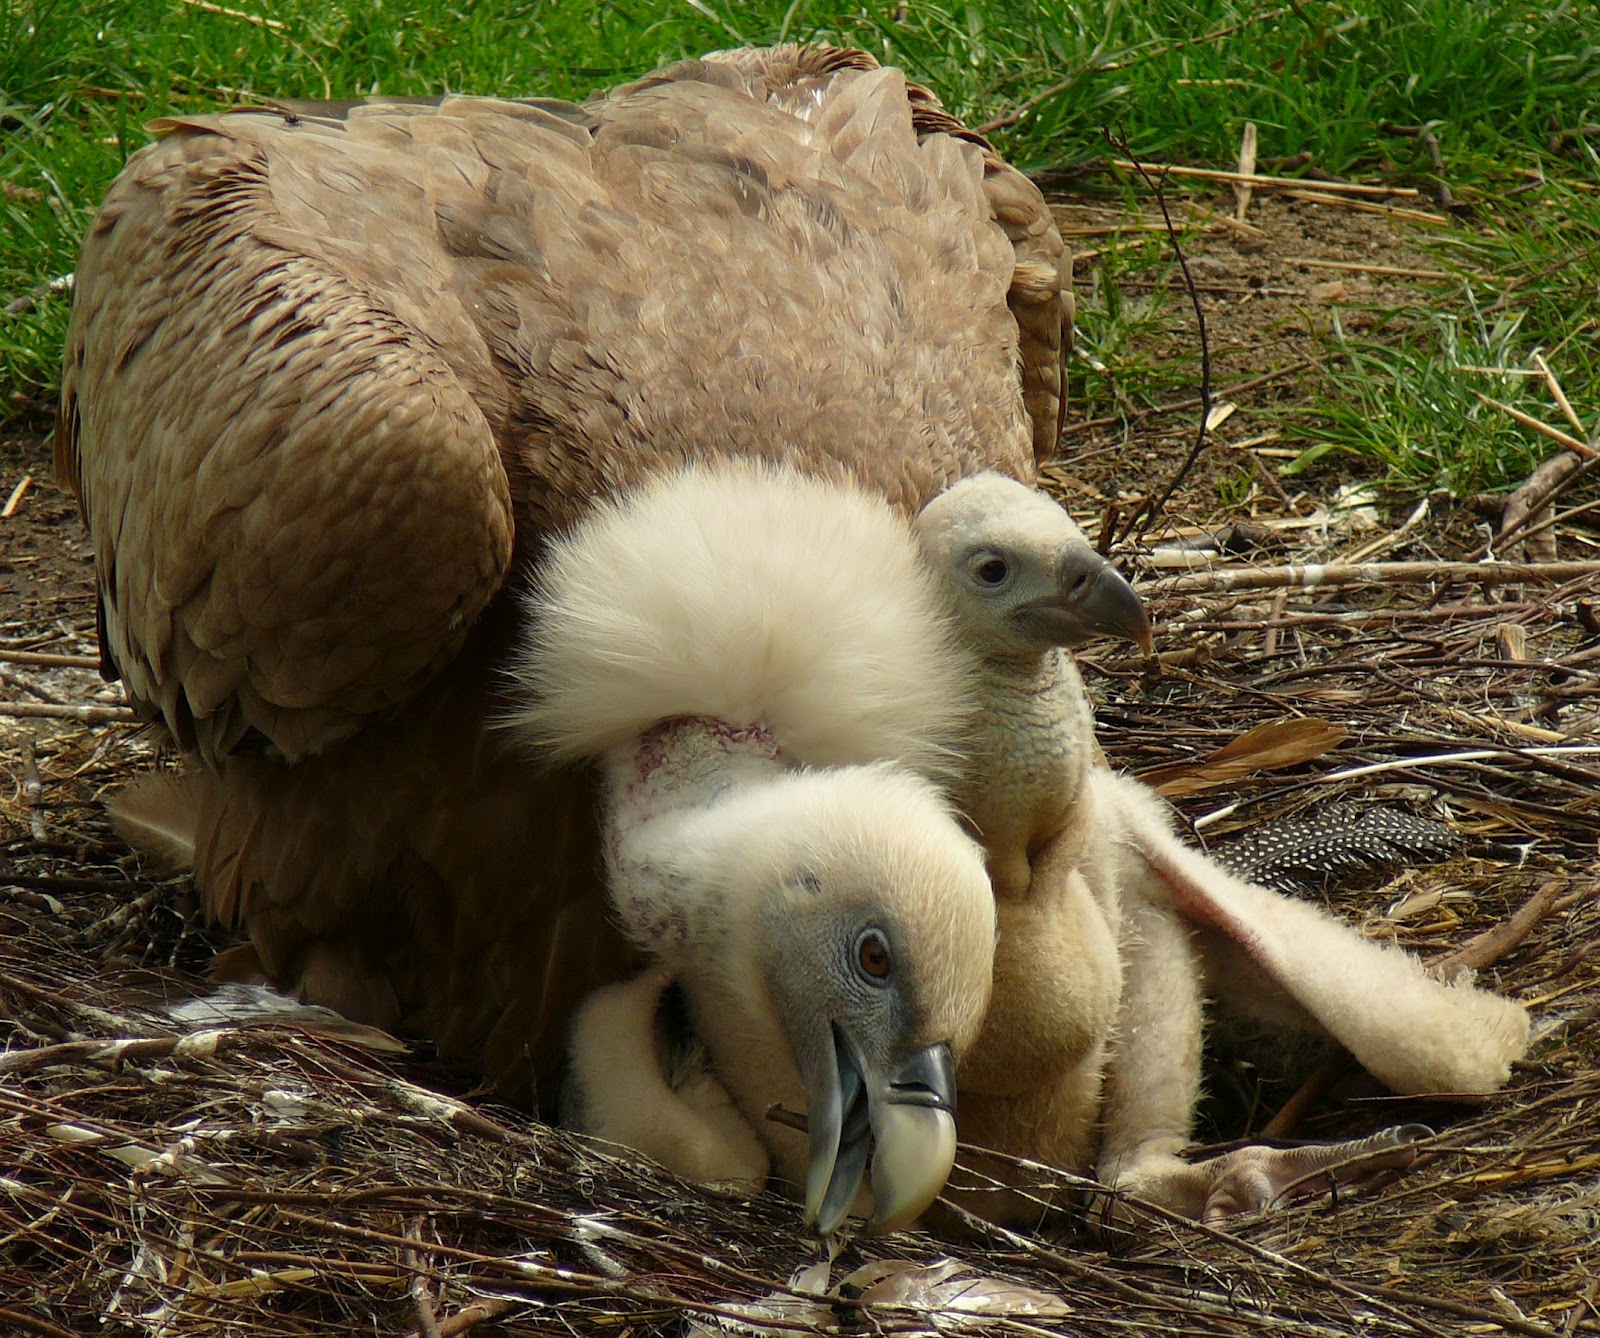 Fascinated by Vultures: 26 days old Eurasian Griffon Vulture chick